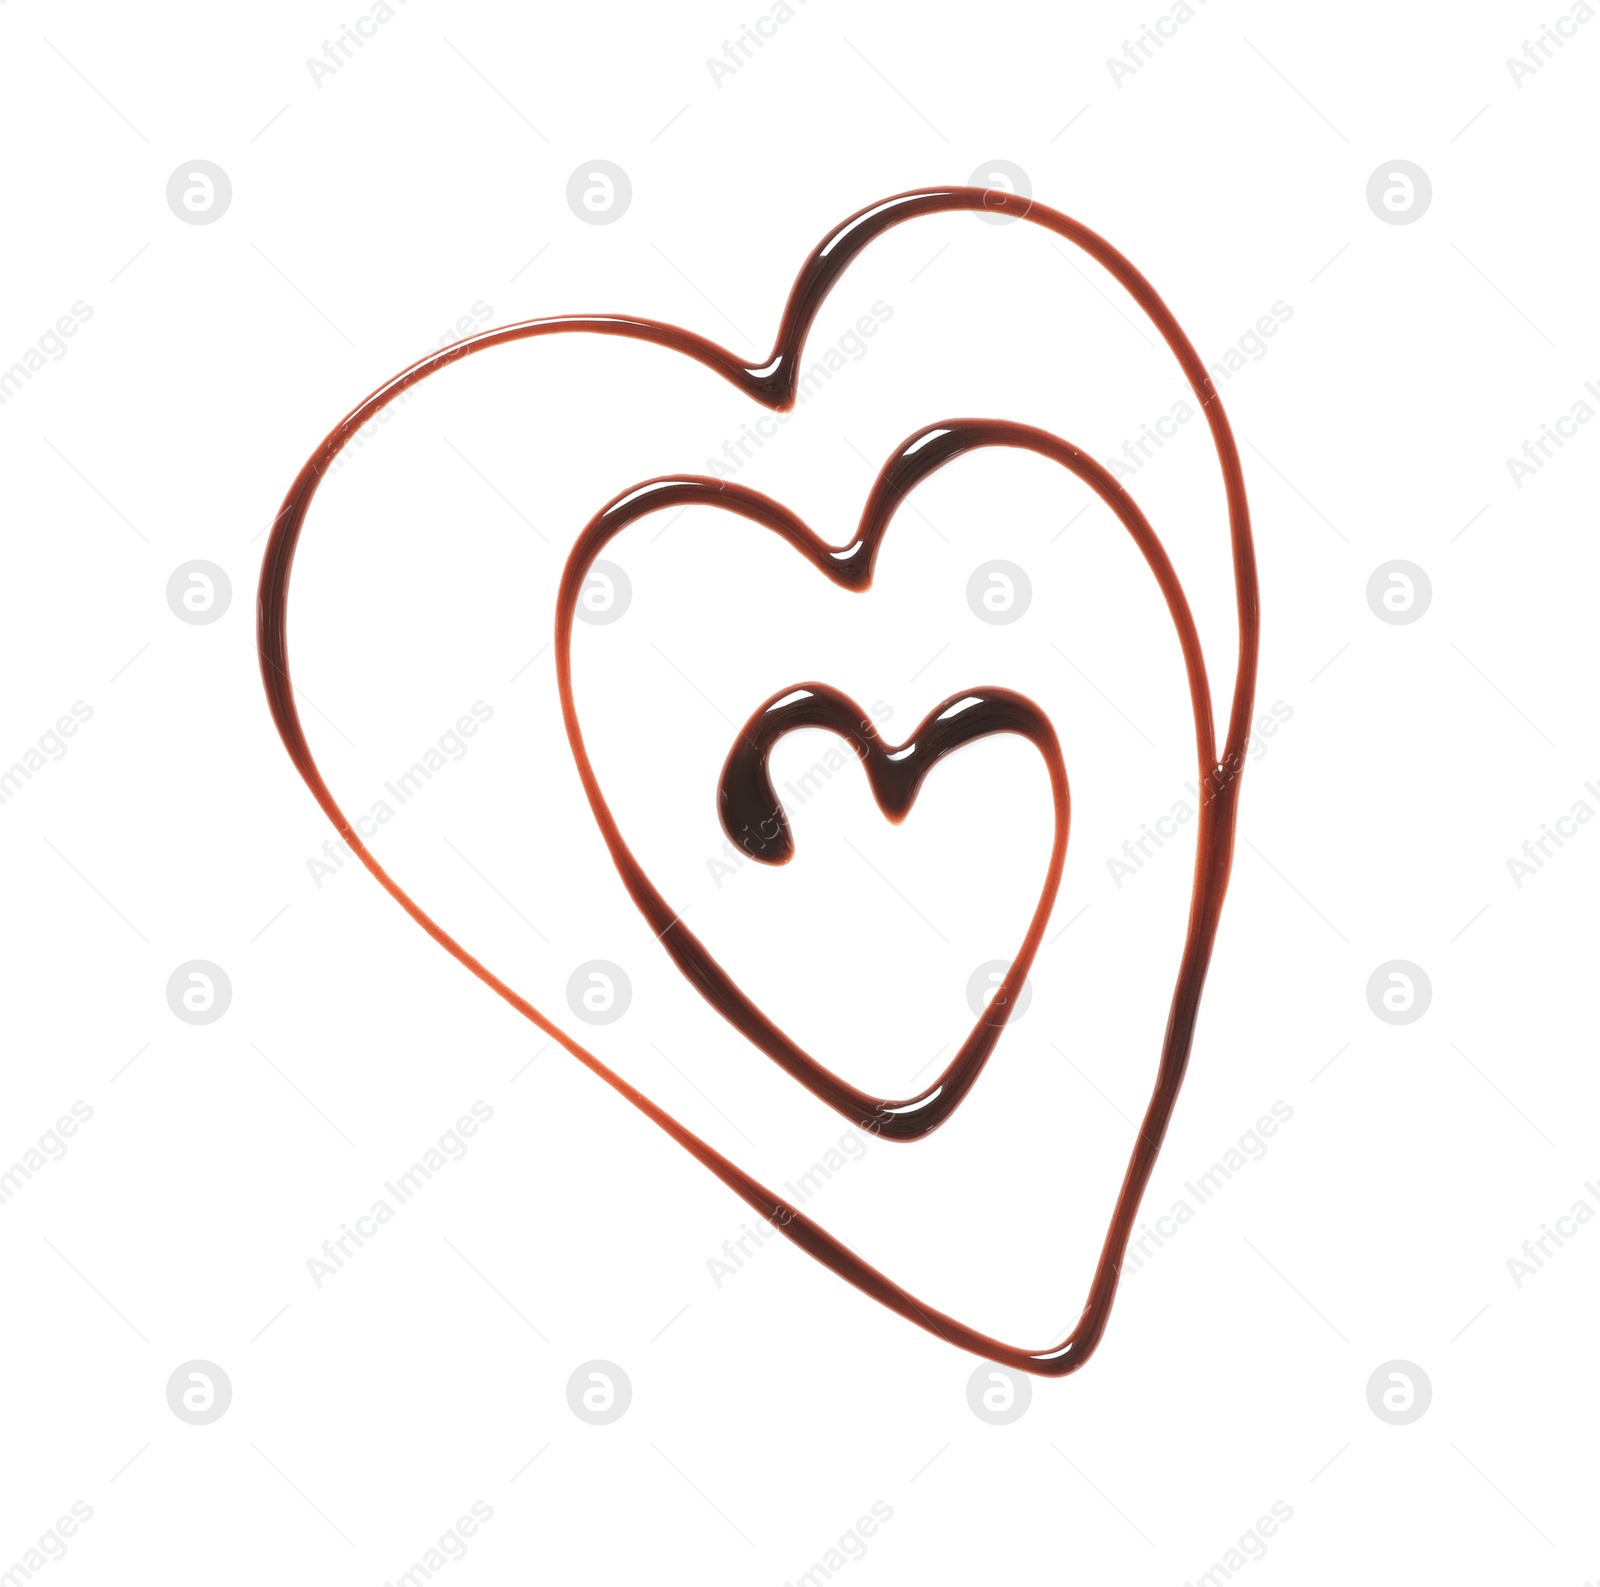 Photo of Heart made of dark chocolate on white background, top view